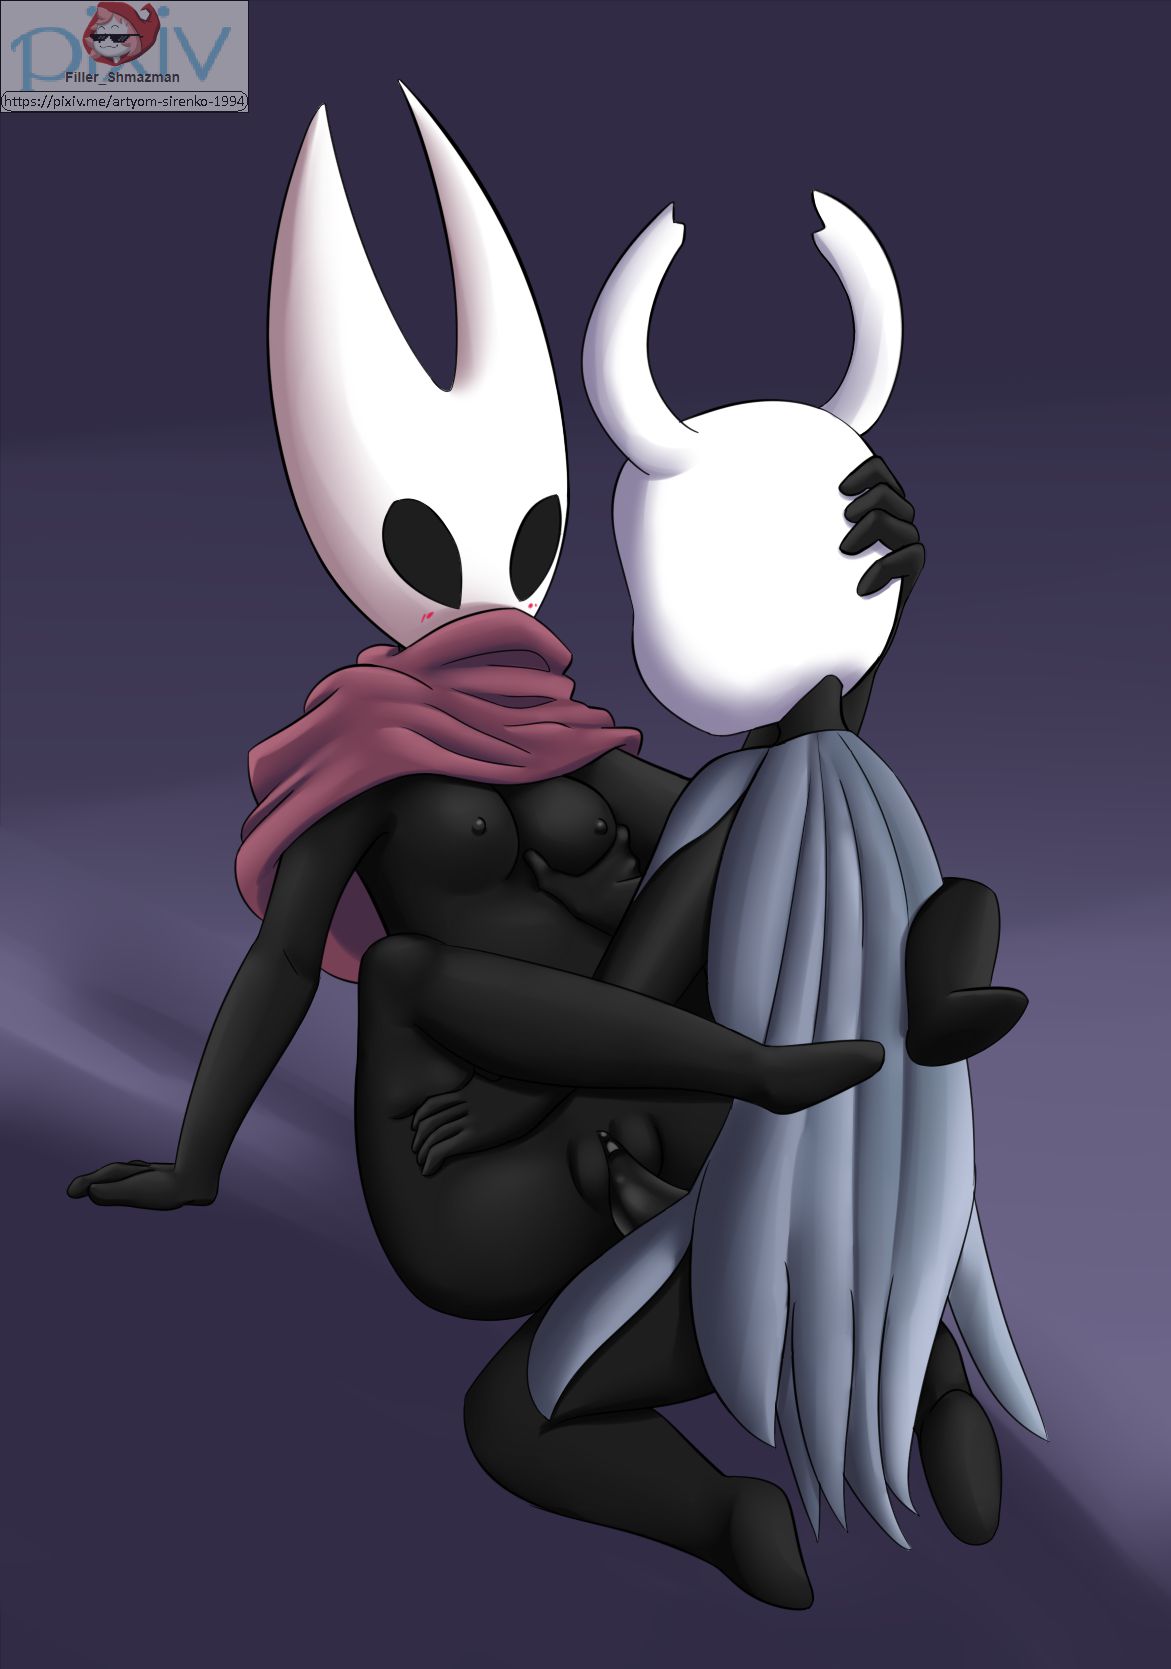 Hollow knight collection 218